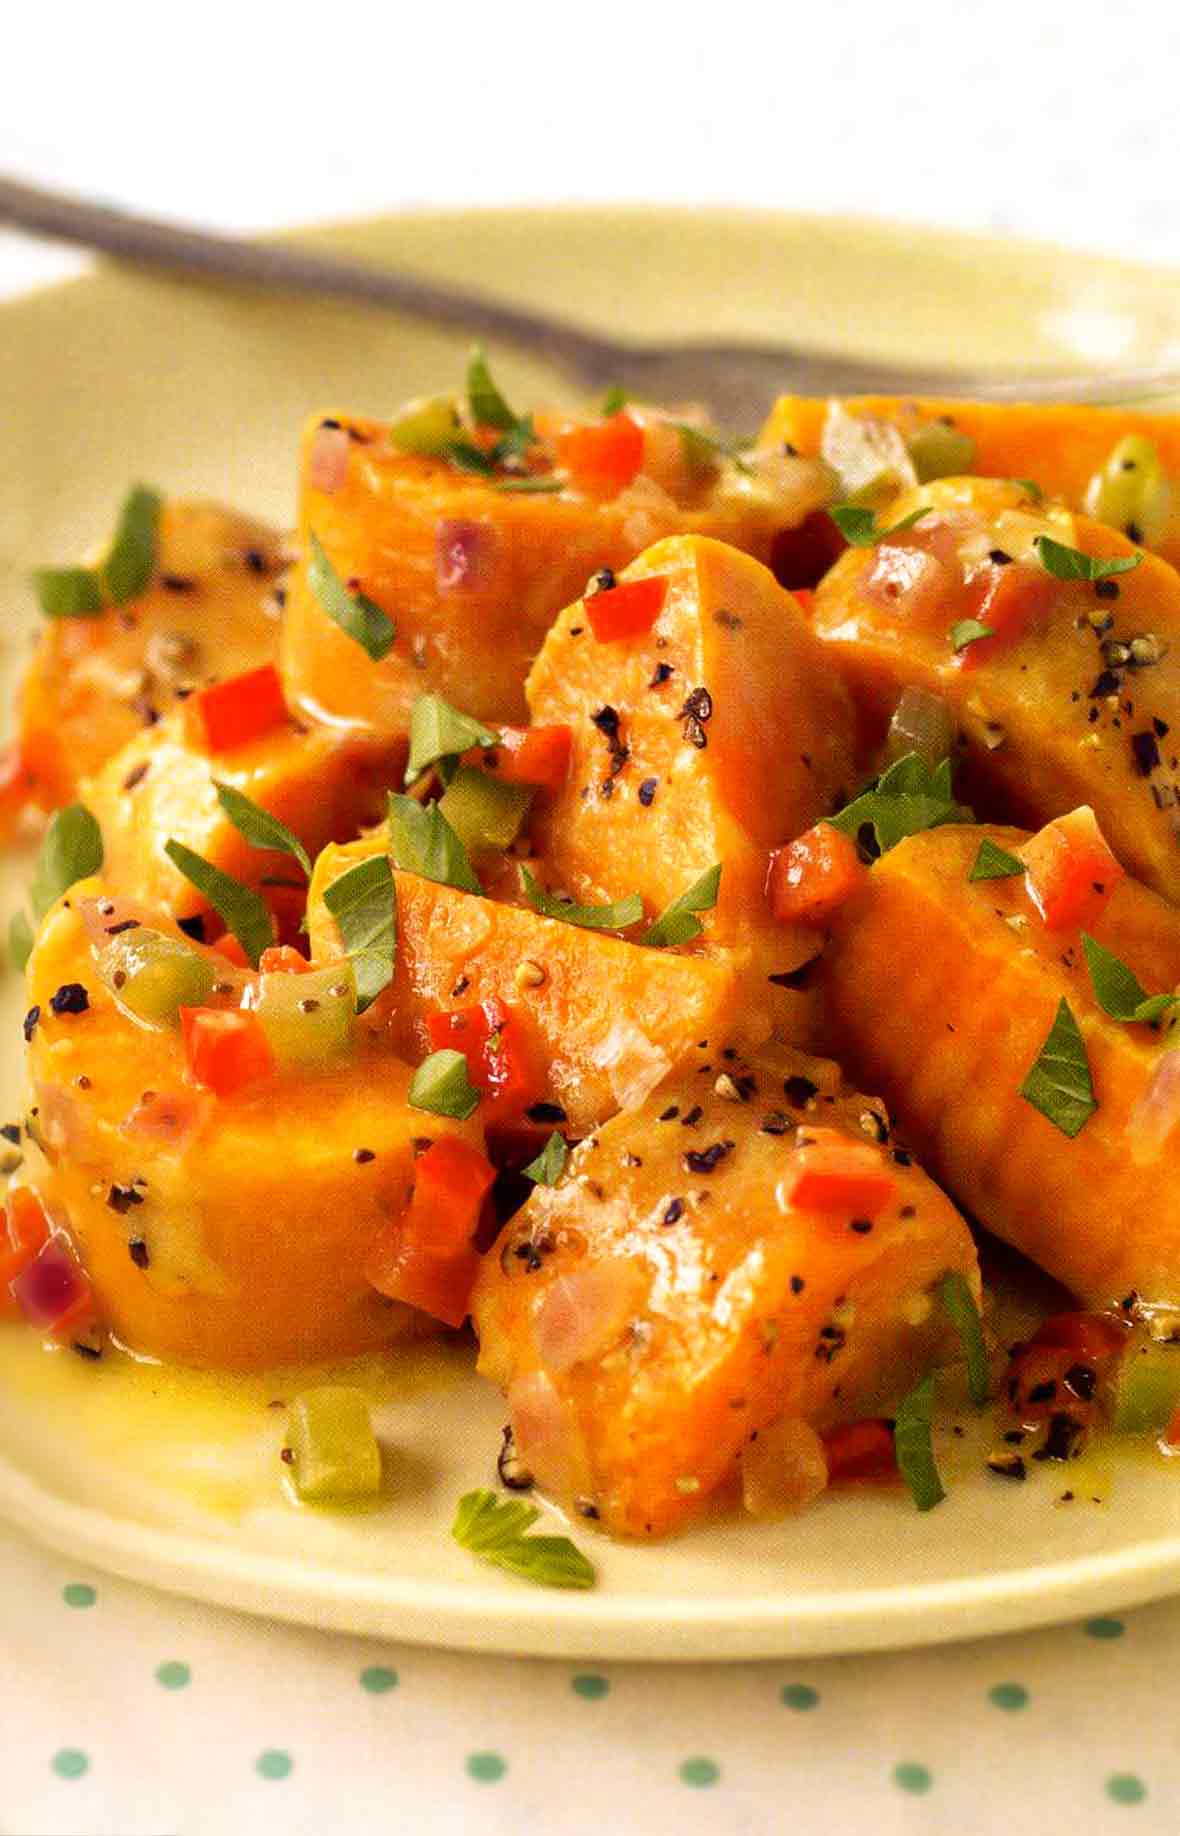 A plate of sweet potato salad sprinkled with cracked pepper, chopped parsley, and pickled pepper relish